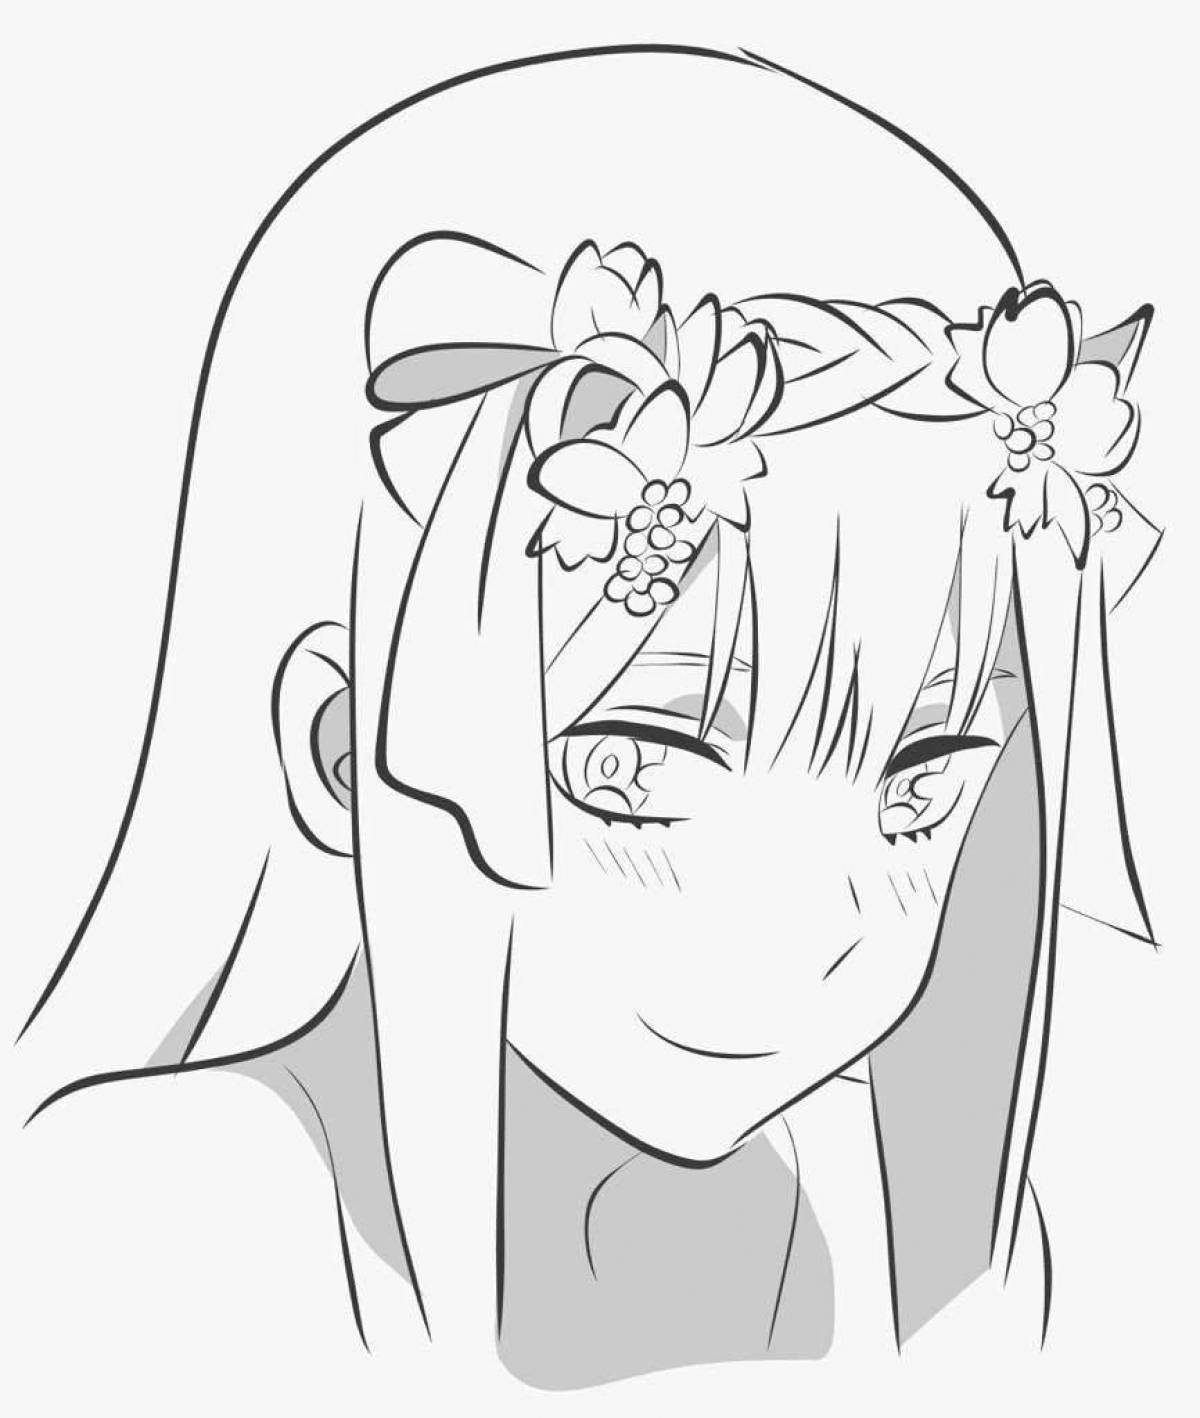 Shining anime coloring page 02